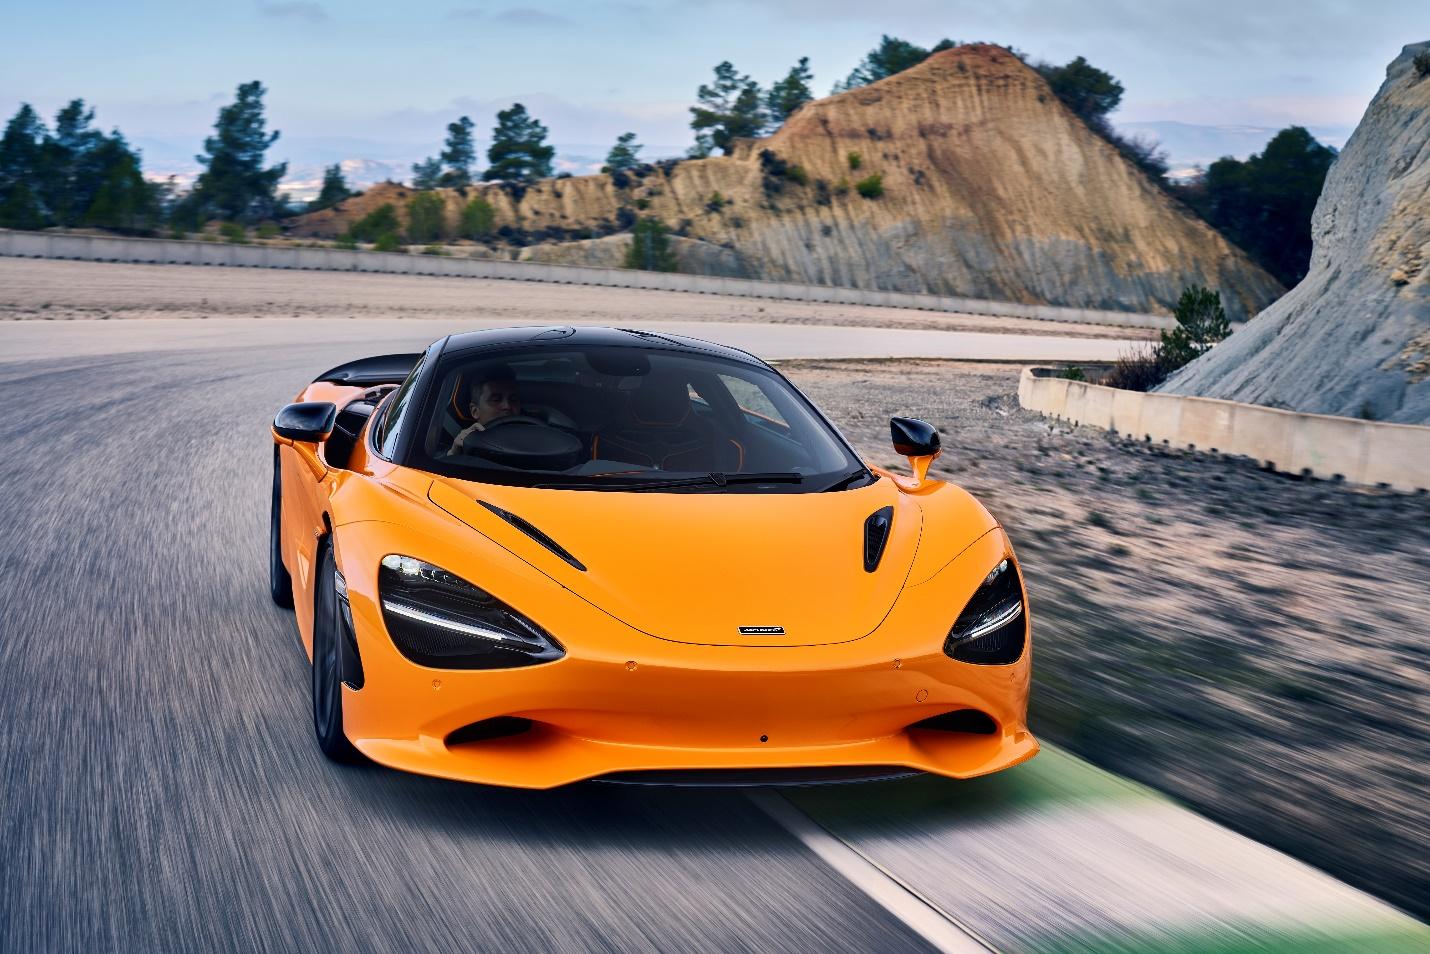 A yellow sports car on a road

Description automatically generated